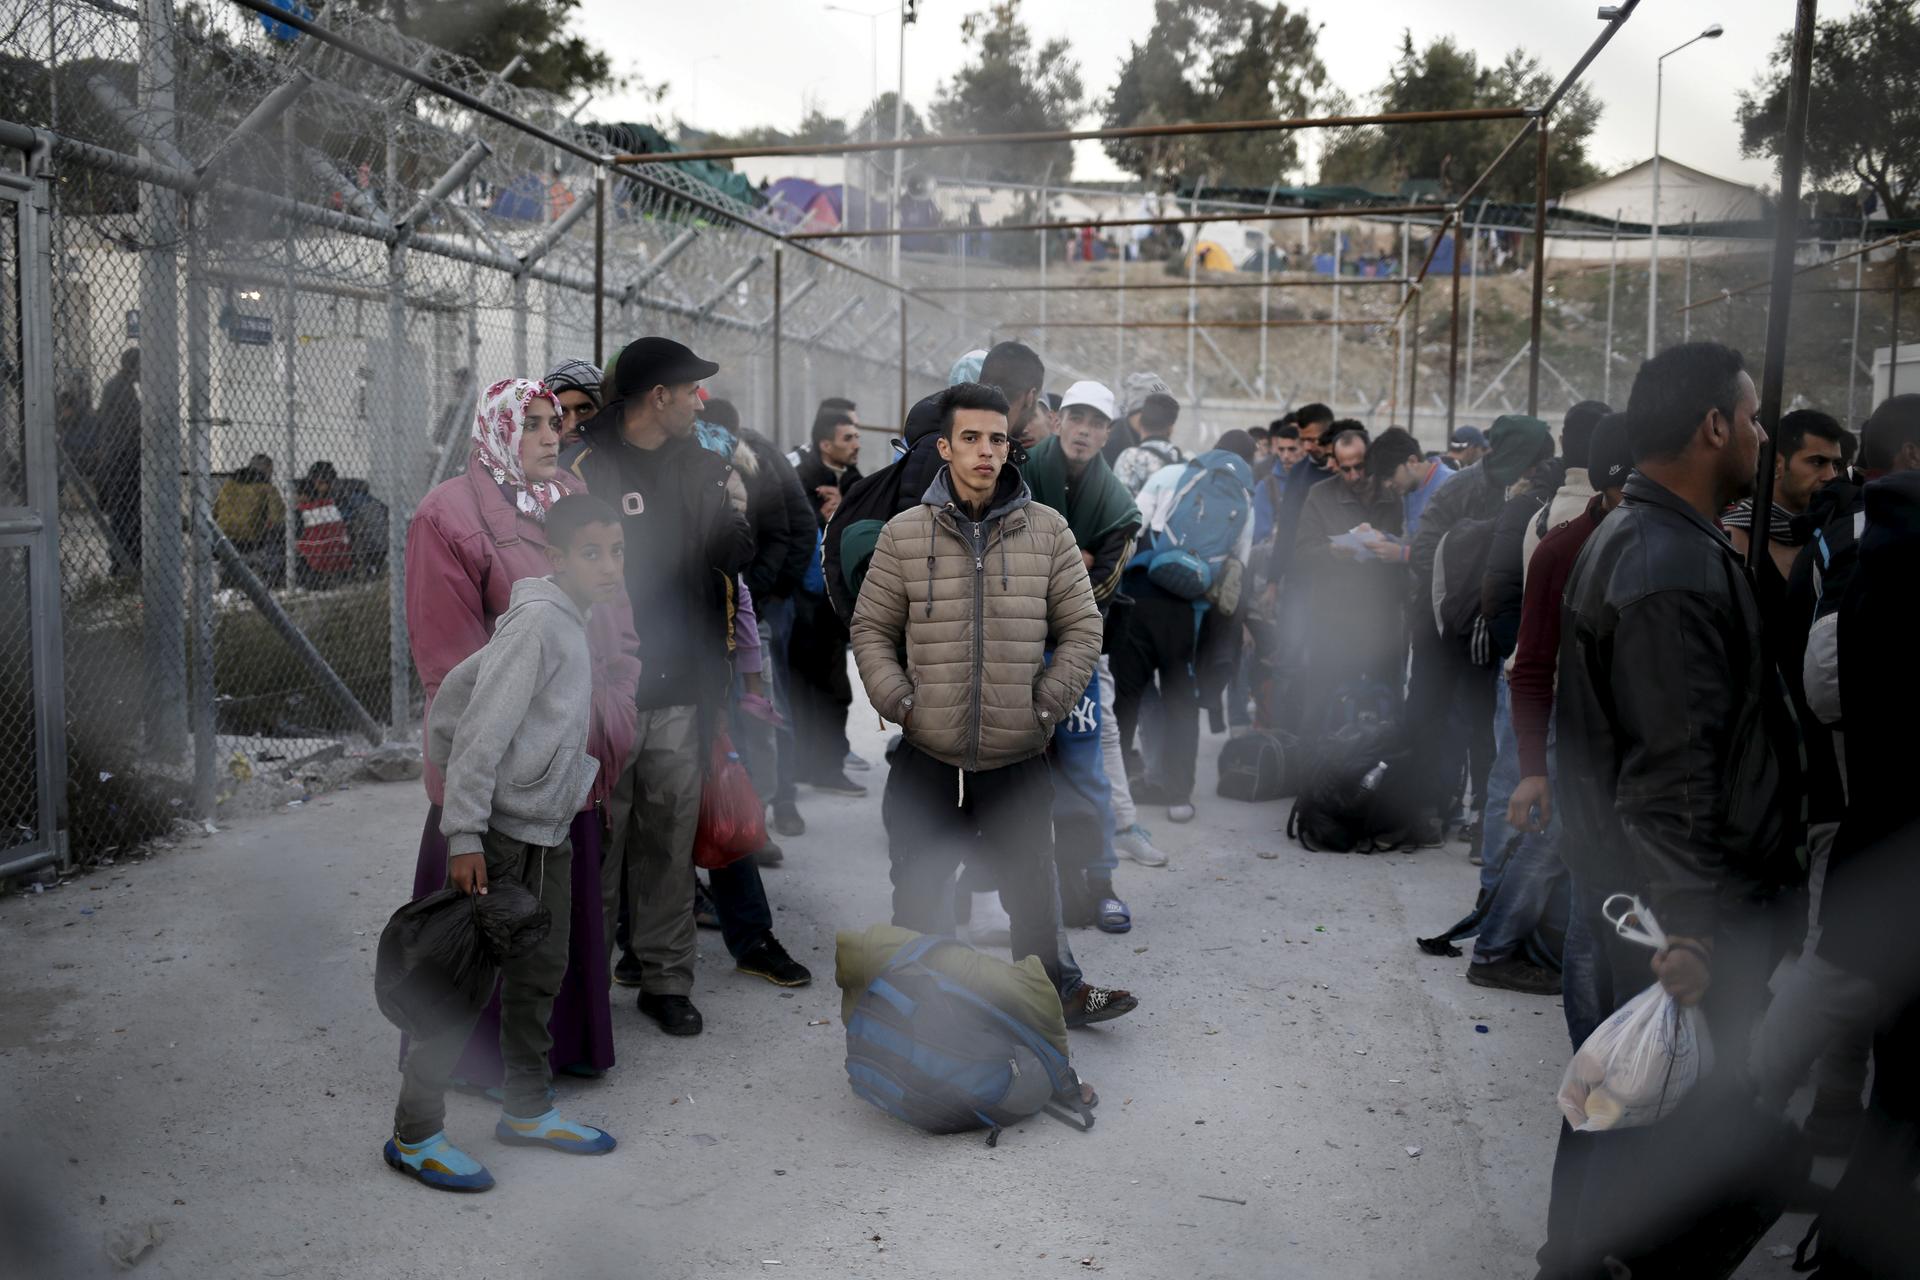 Refugees and migrants wait to be registered at the Moria refugee camp on the Greek island of Lesbos, November 5, 2015.